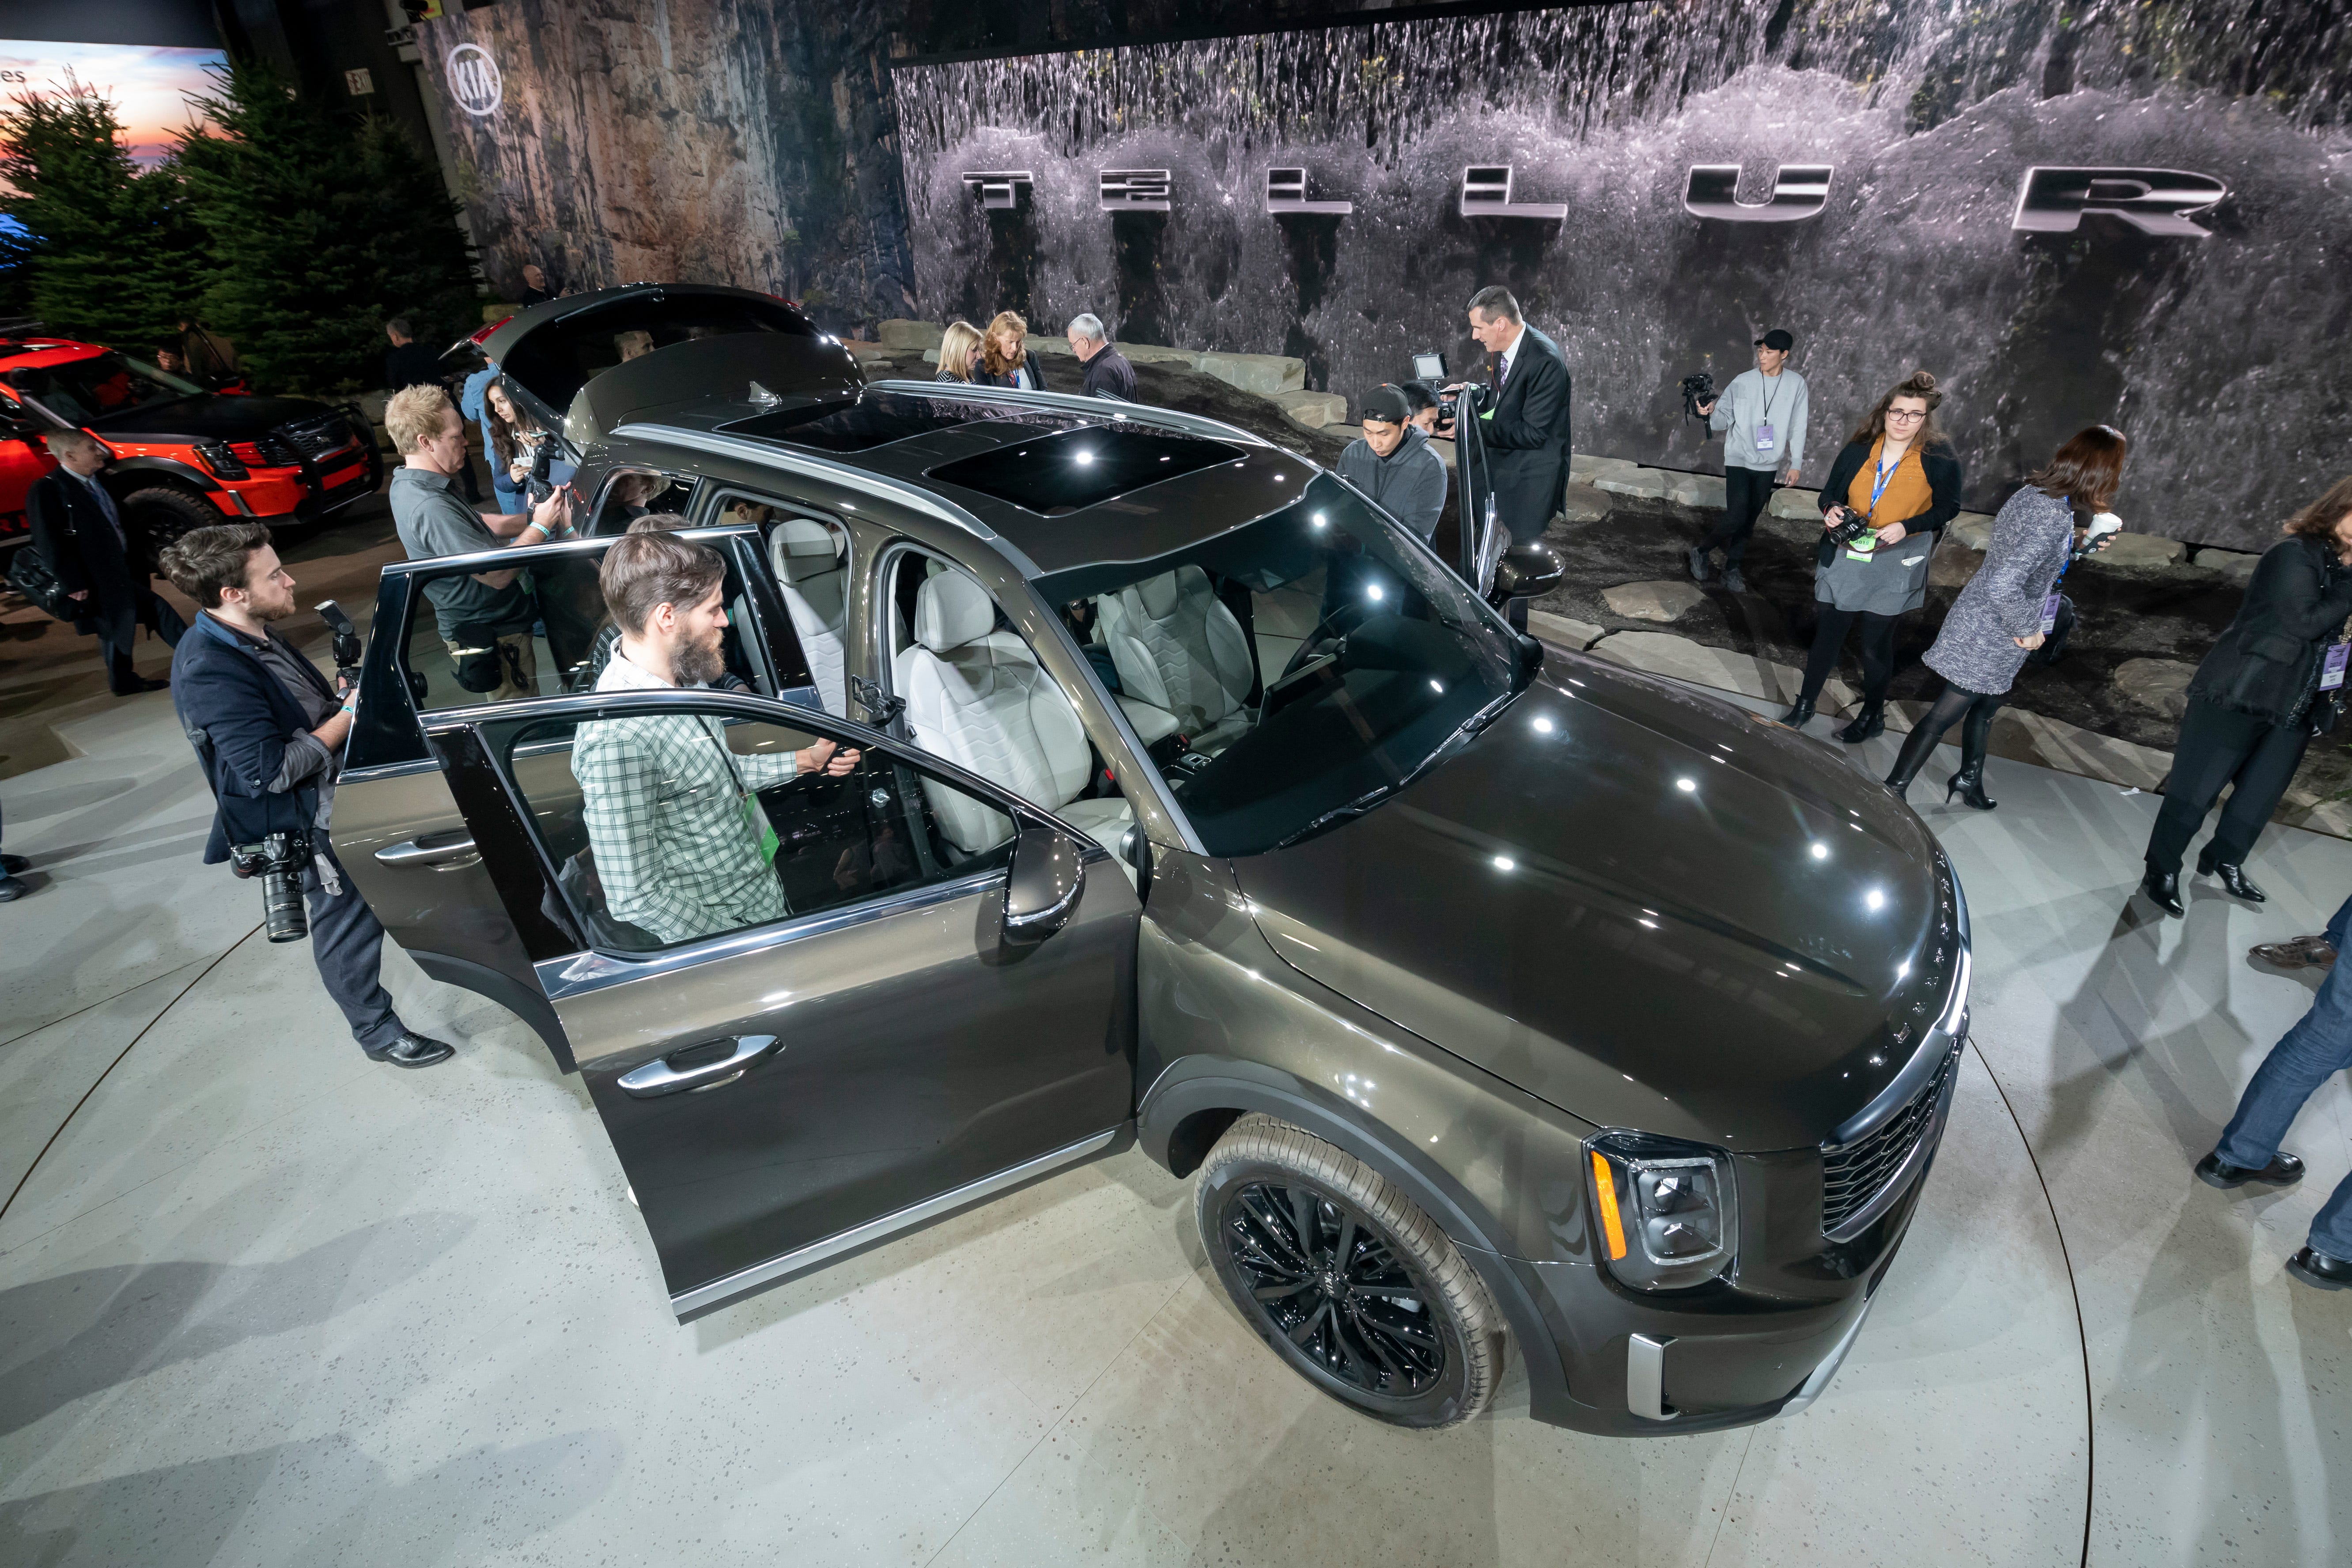 The 2020 Kia Telluride is revealed during the North American International Auto Show on Monday in Detroit.